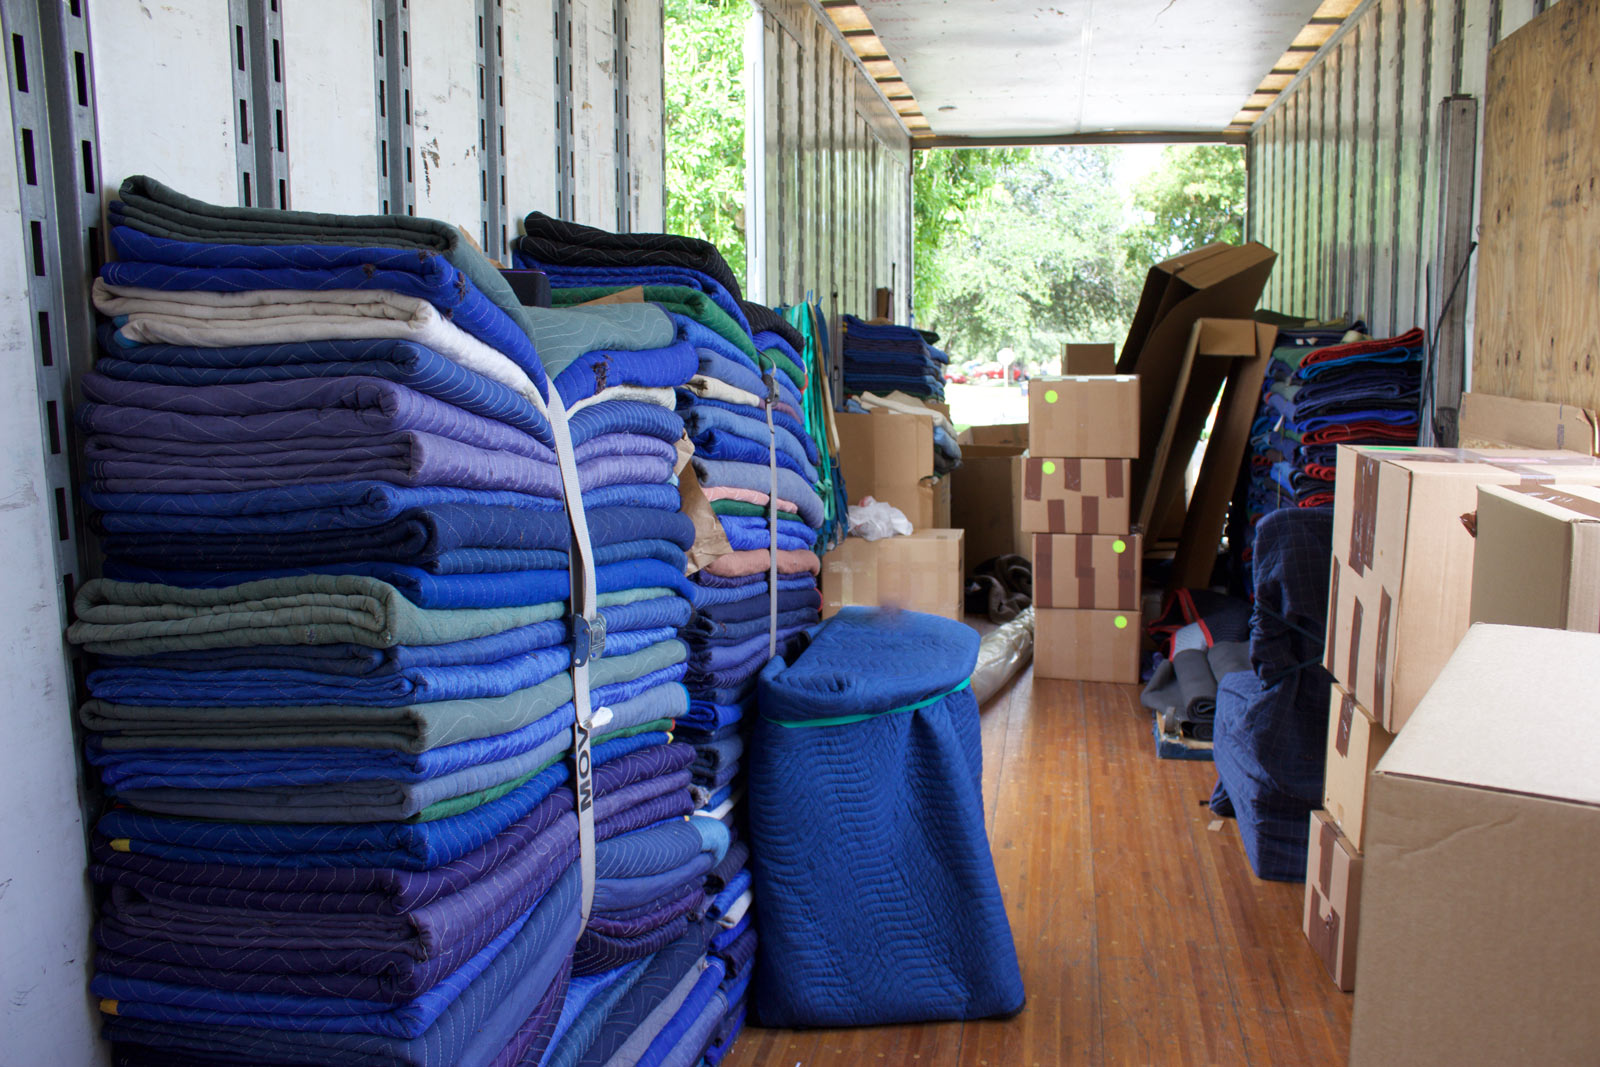 Moving and storage trailer with strapped moving blankets and packing supplies